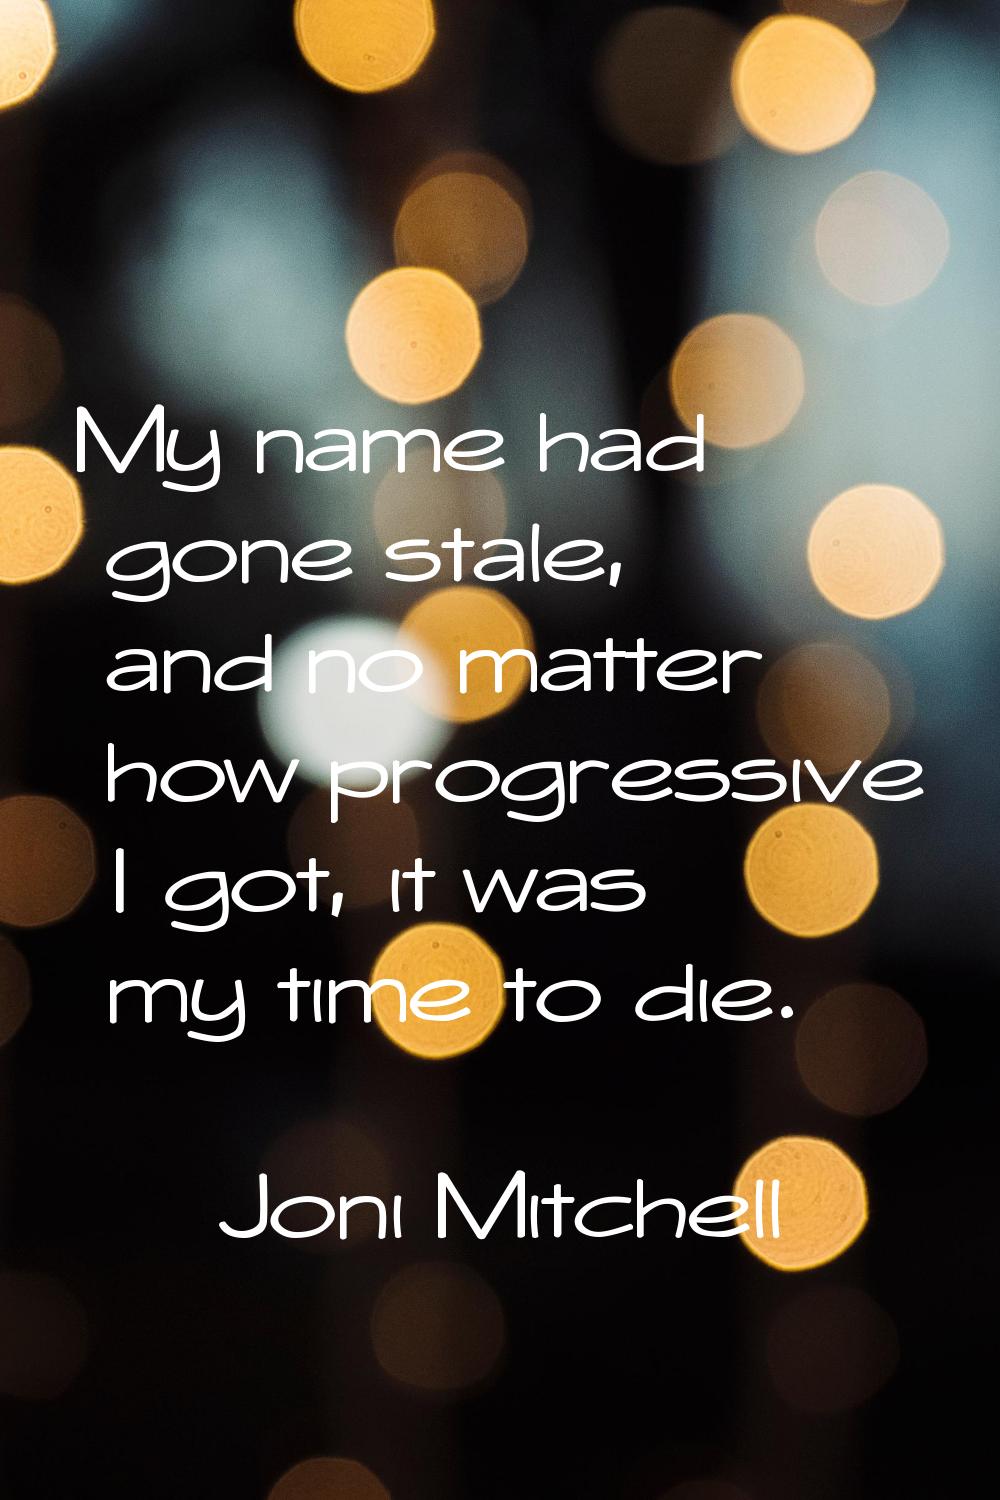 My name had gone stale, and no matter how progressive I got, it was my time to die.